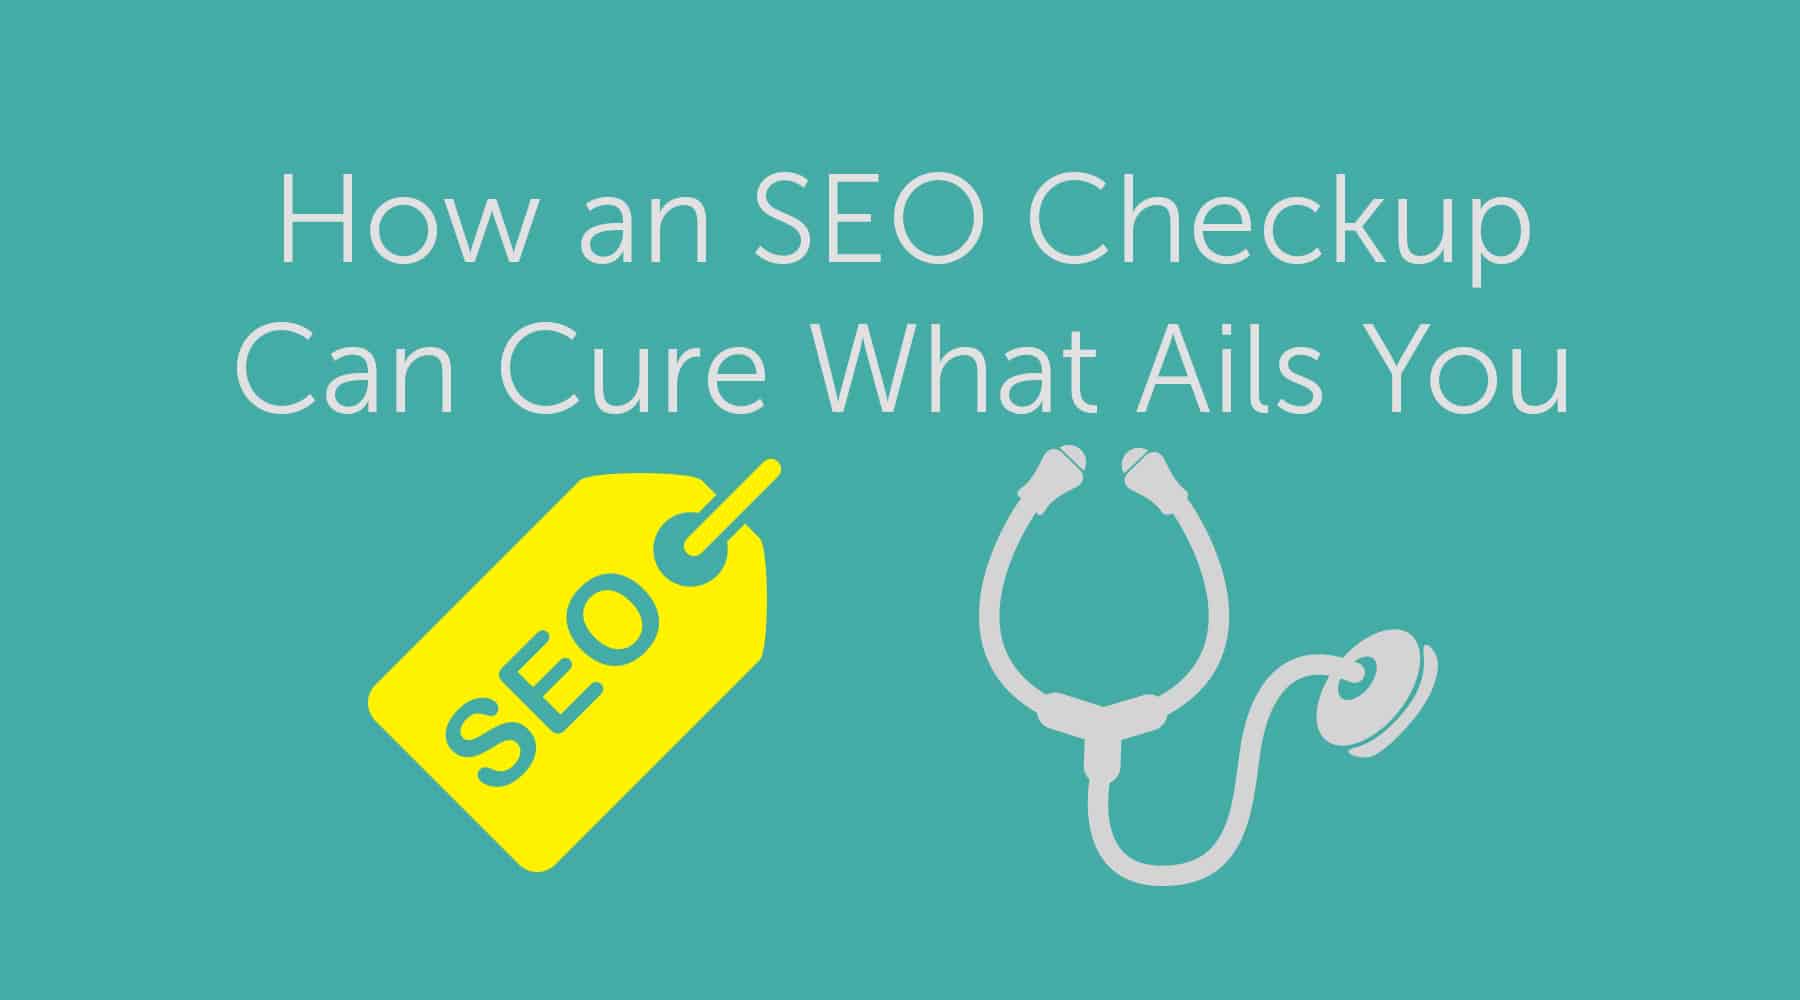 You are currently viewing How an SEO Checkup Can Cure What Ails You